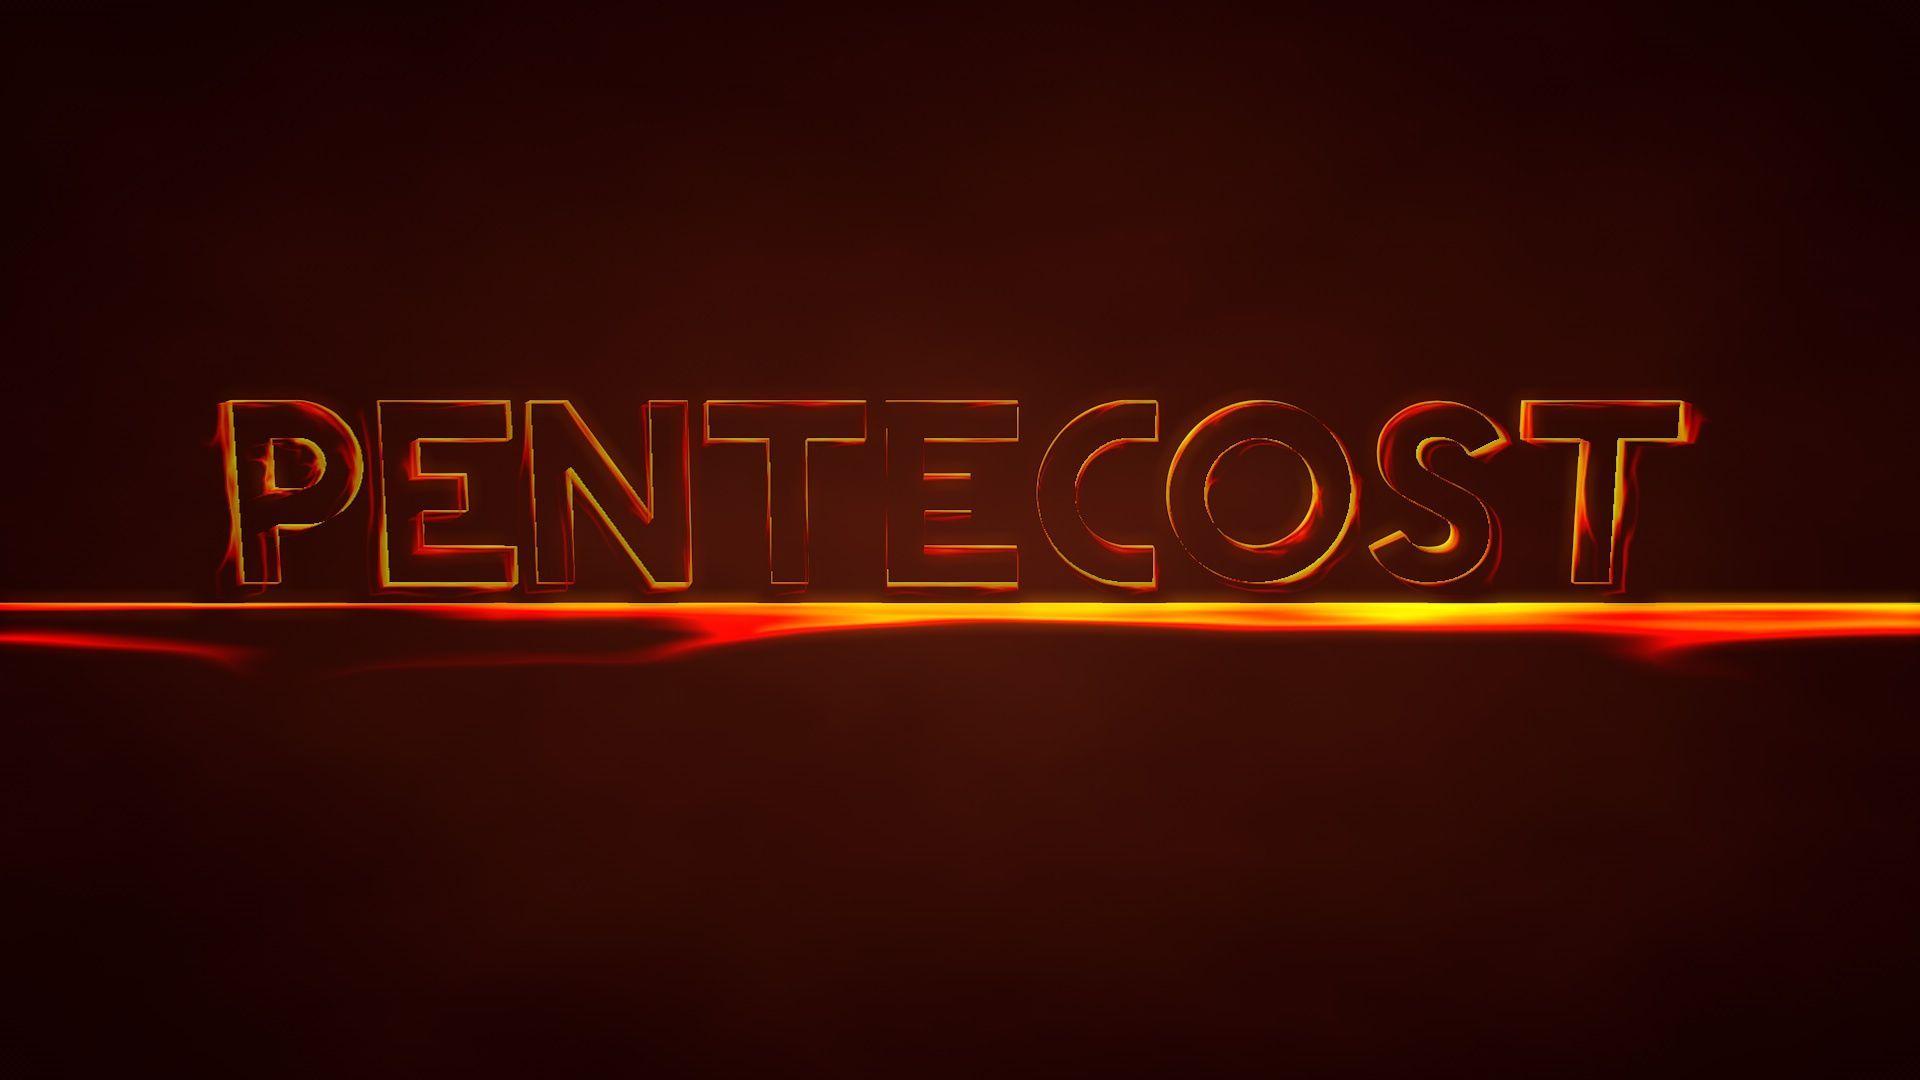 Celebrate Pentecost with our blazing video, PowerPoint